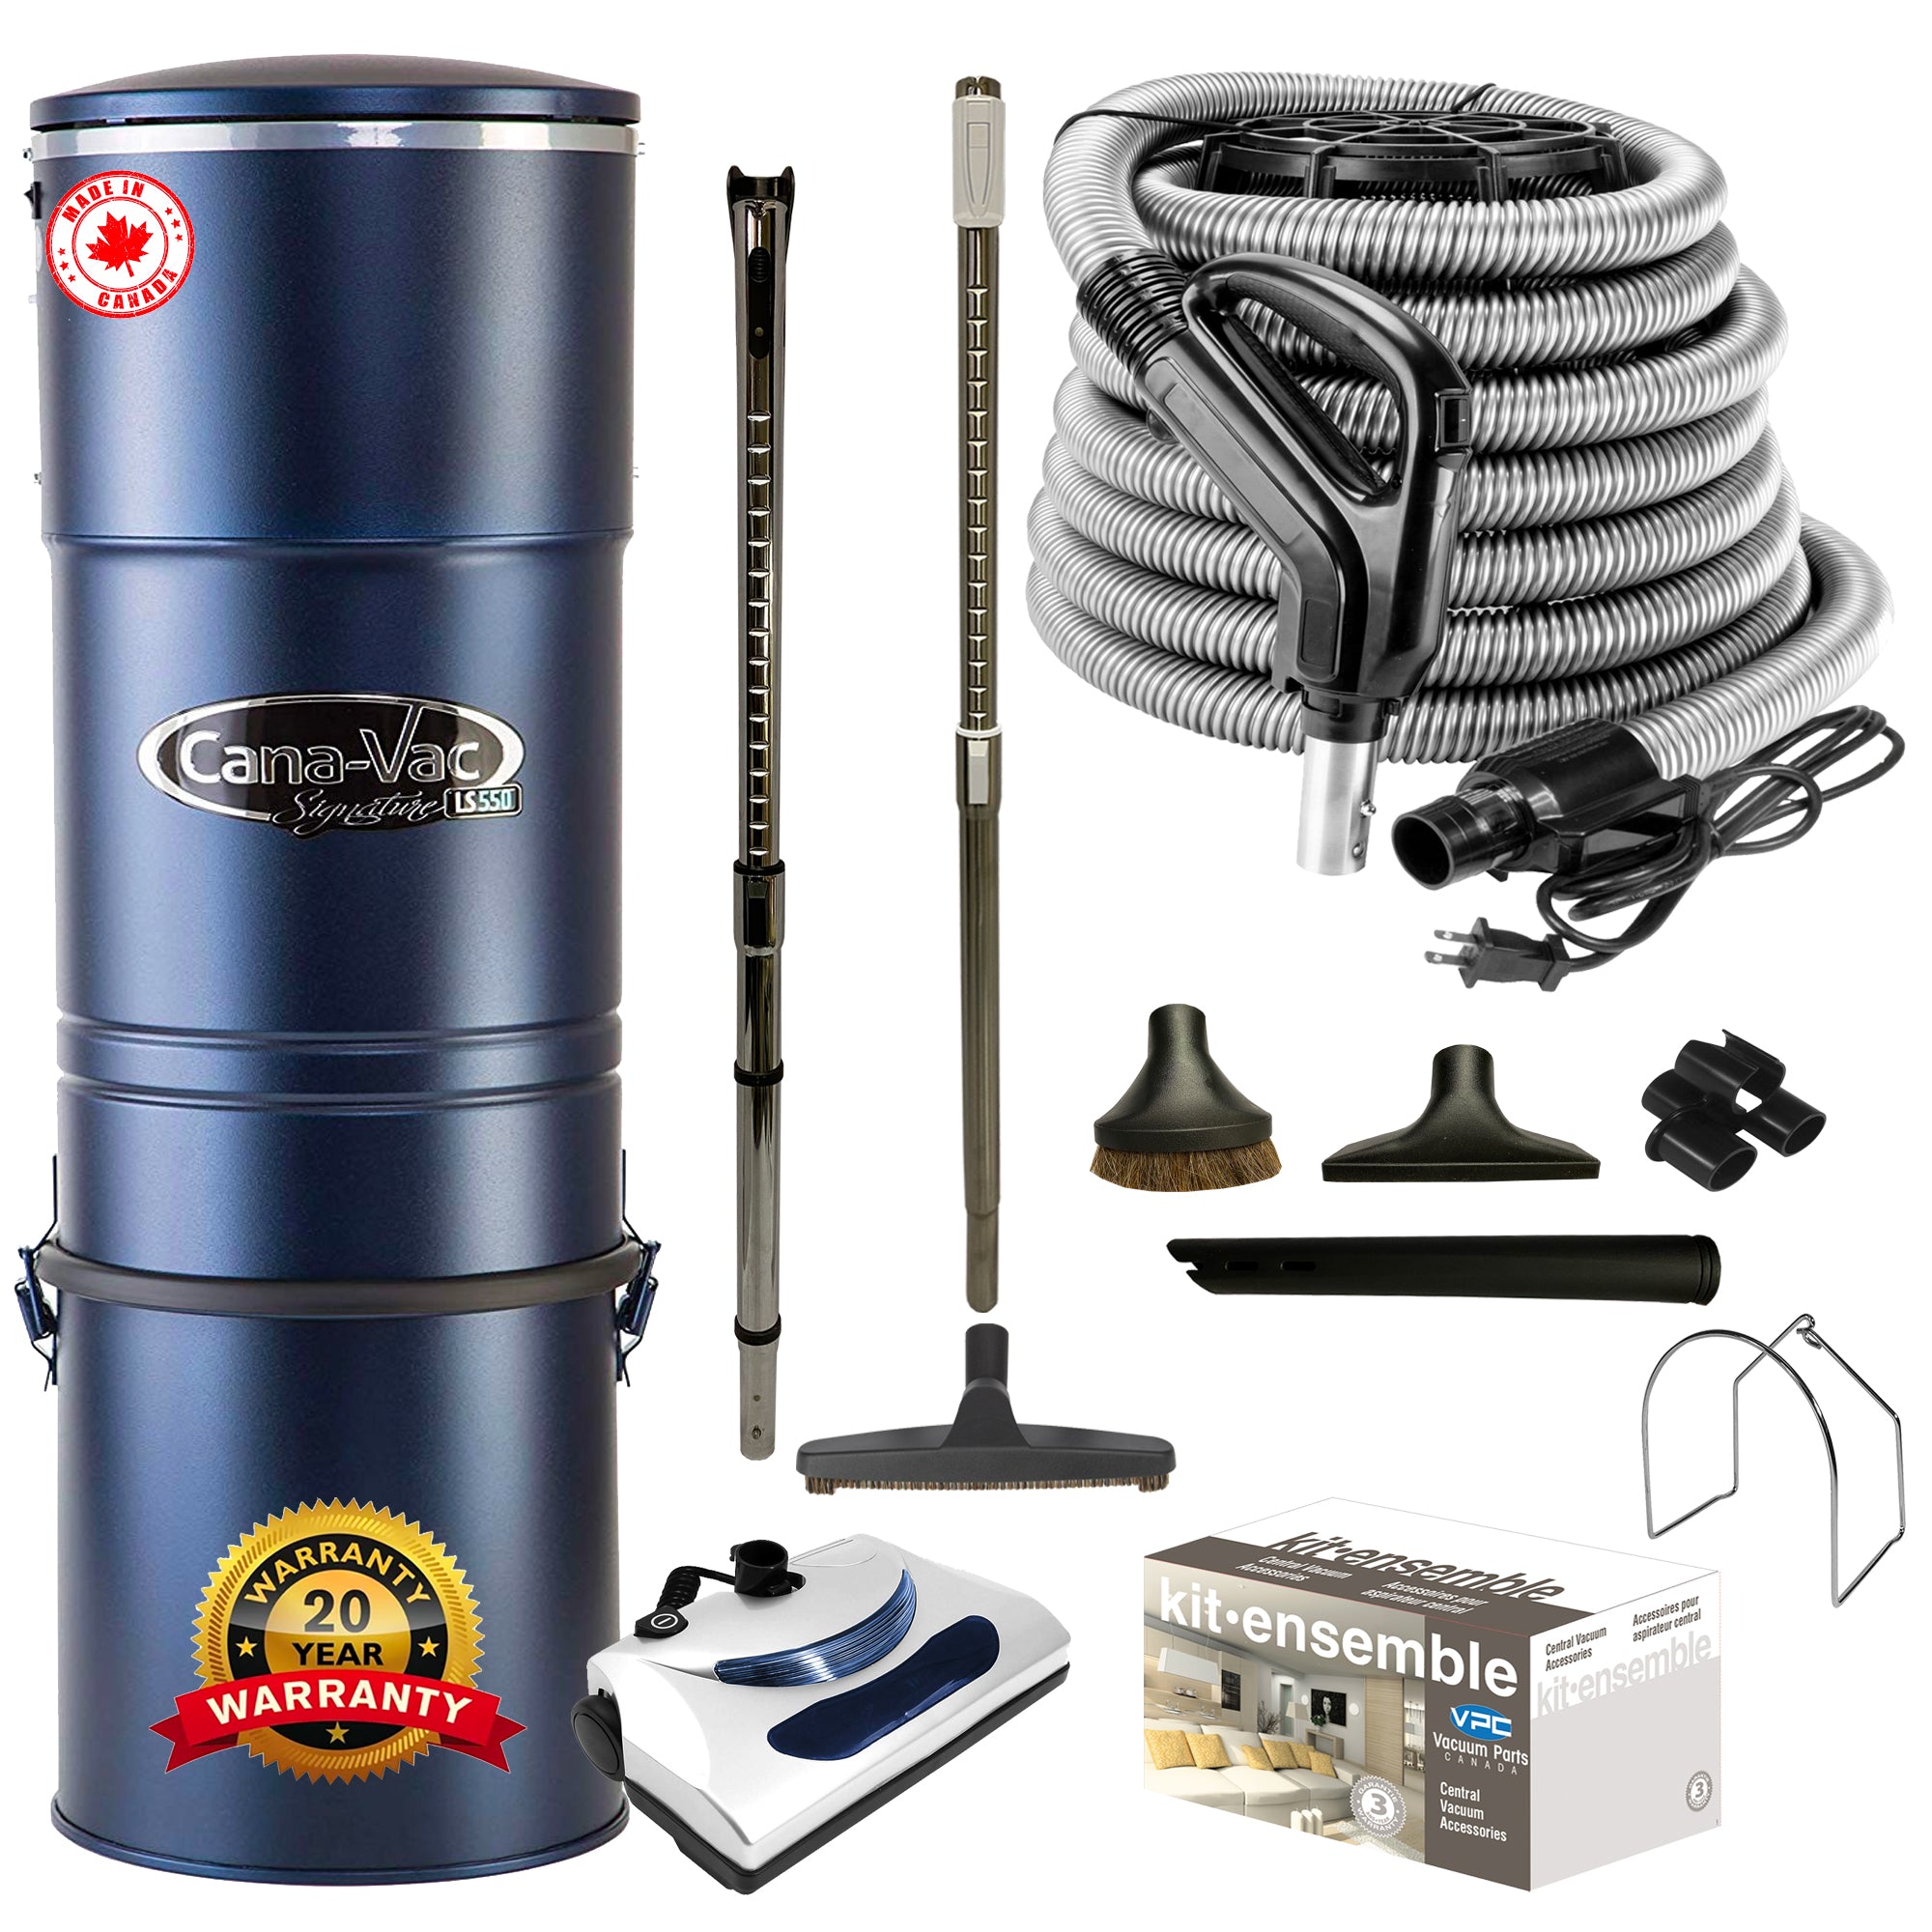 Cana-Vac LS590 Central Vacuum with Basic Electric Package (Black)